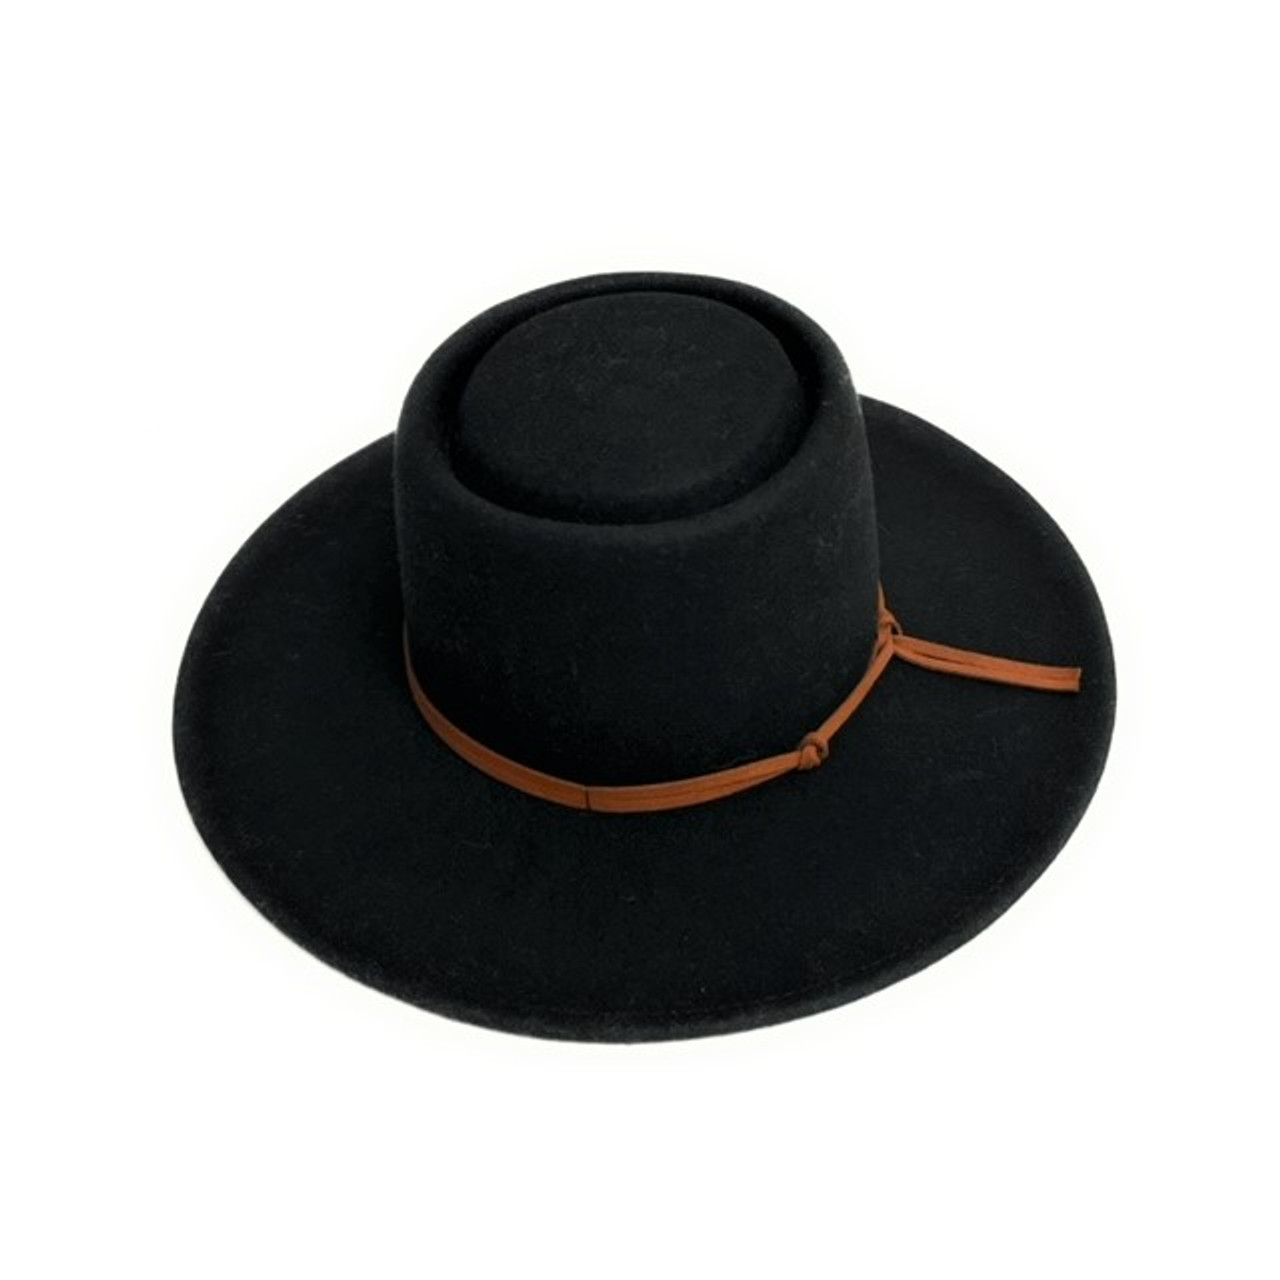 https://cdn11.bigcommerce.com/s-2d224/images/stencil/1280x1280/products/24356/57676/22S-1101-round-crown-wool-felt-with-suded-trim-black__01579.1693502400.jpg?c=2